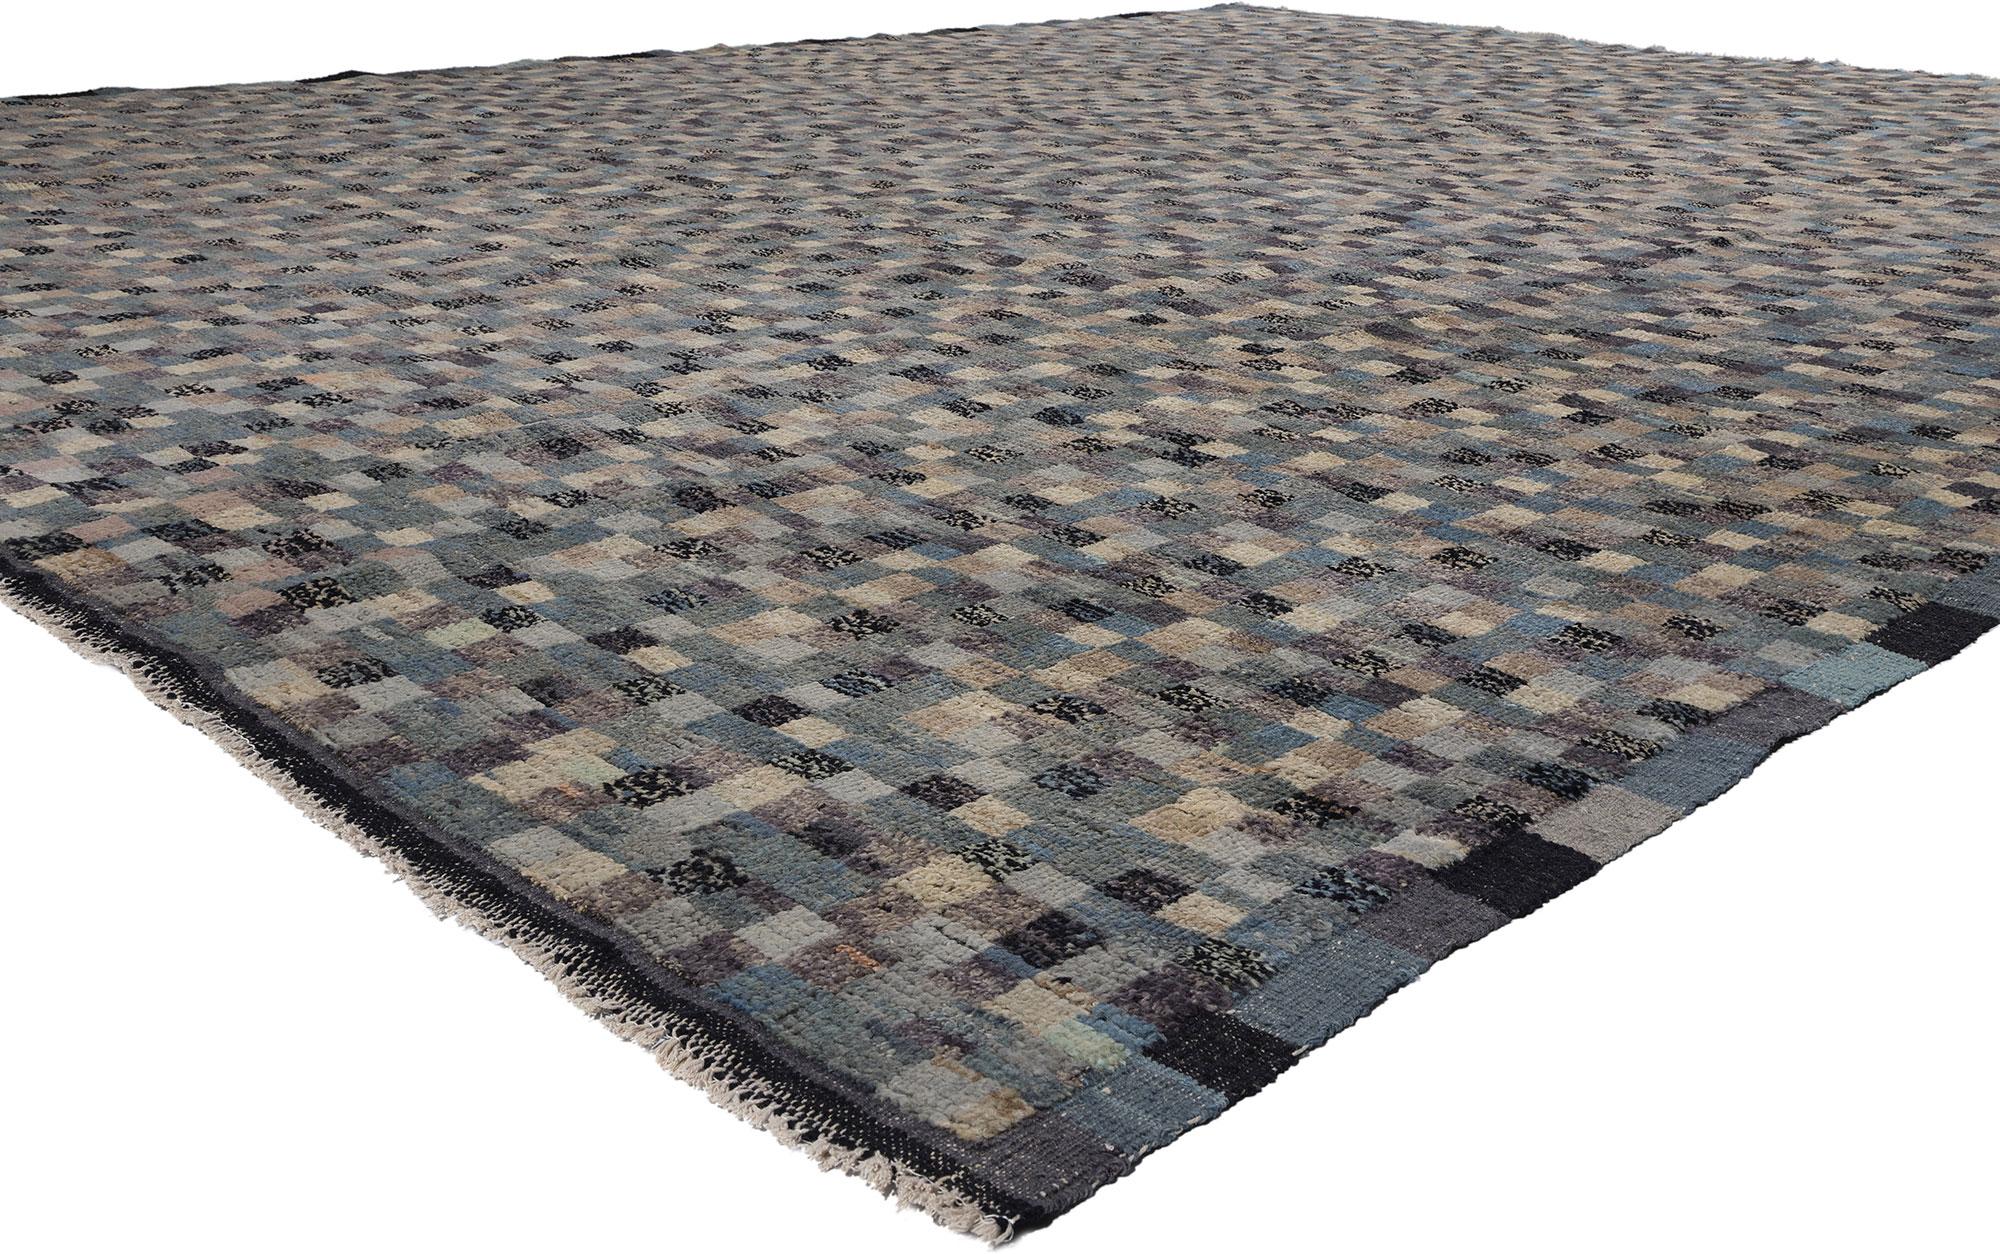 81053 Modern Bauhaus Checkered Moroccan Rug, 12'02 x 15'00. Enter a realm where the collision of artistic movements and the metamorphosis of cultural heritage conjure an atmosphere of dark elegance in this hand-knotted wool Modern Moroccan rug. This